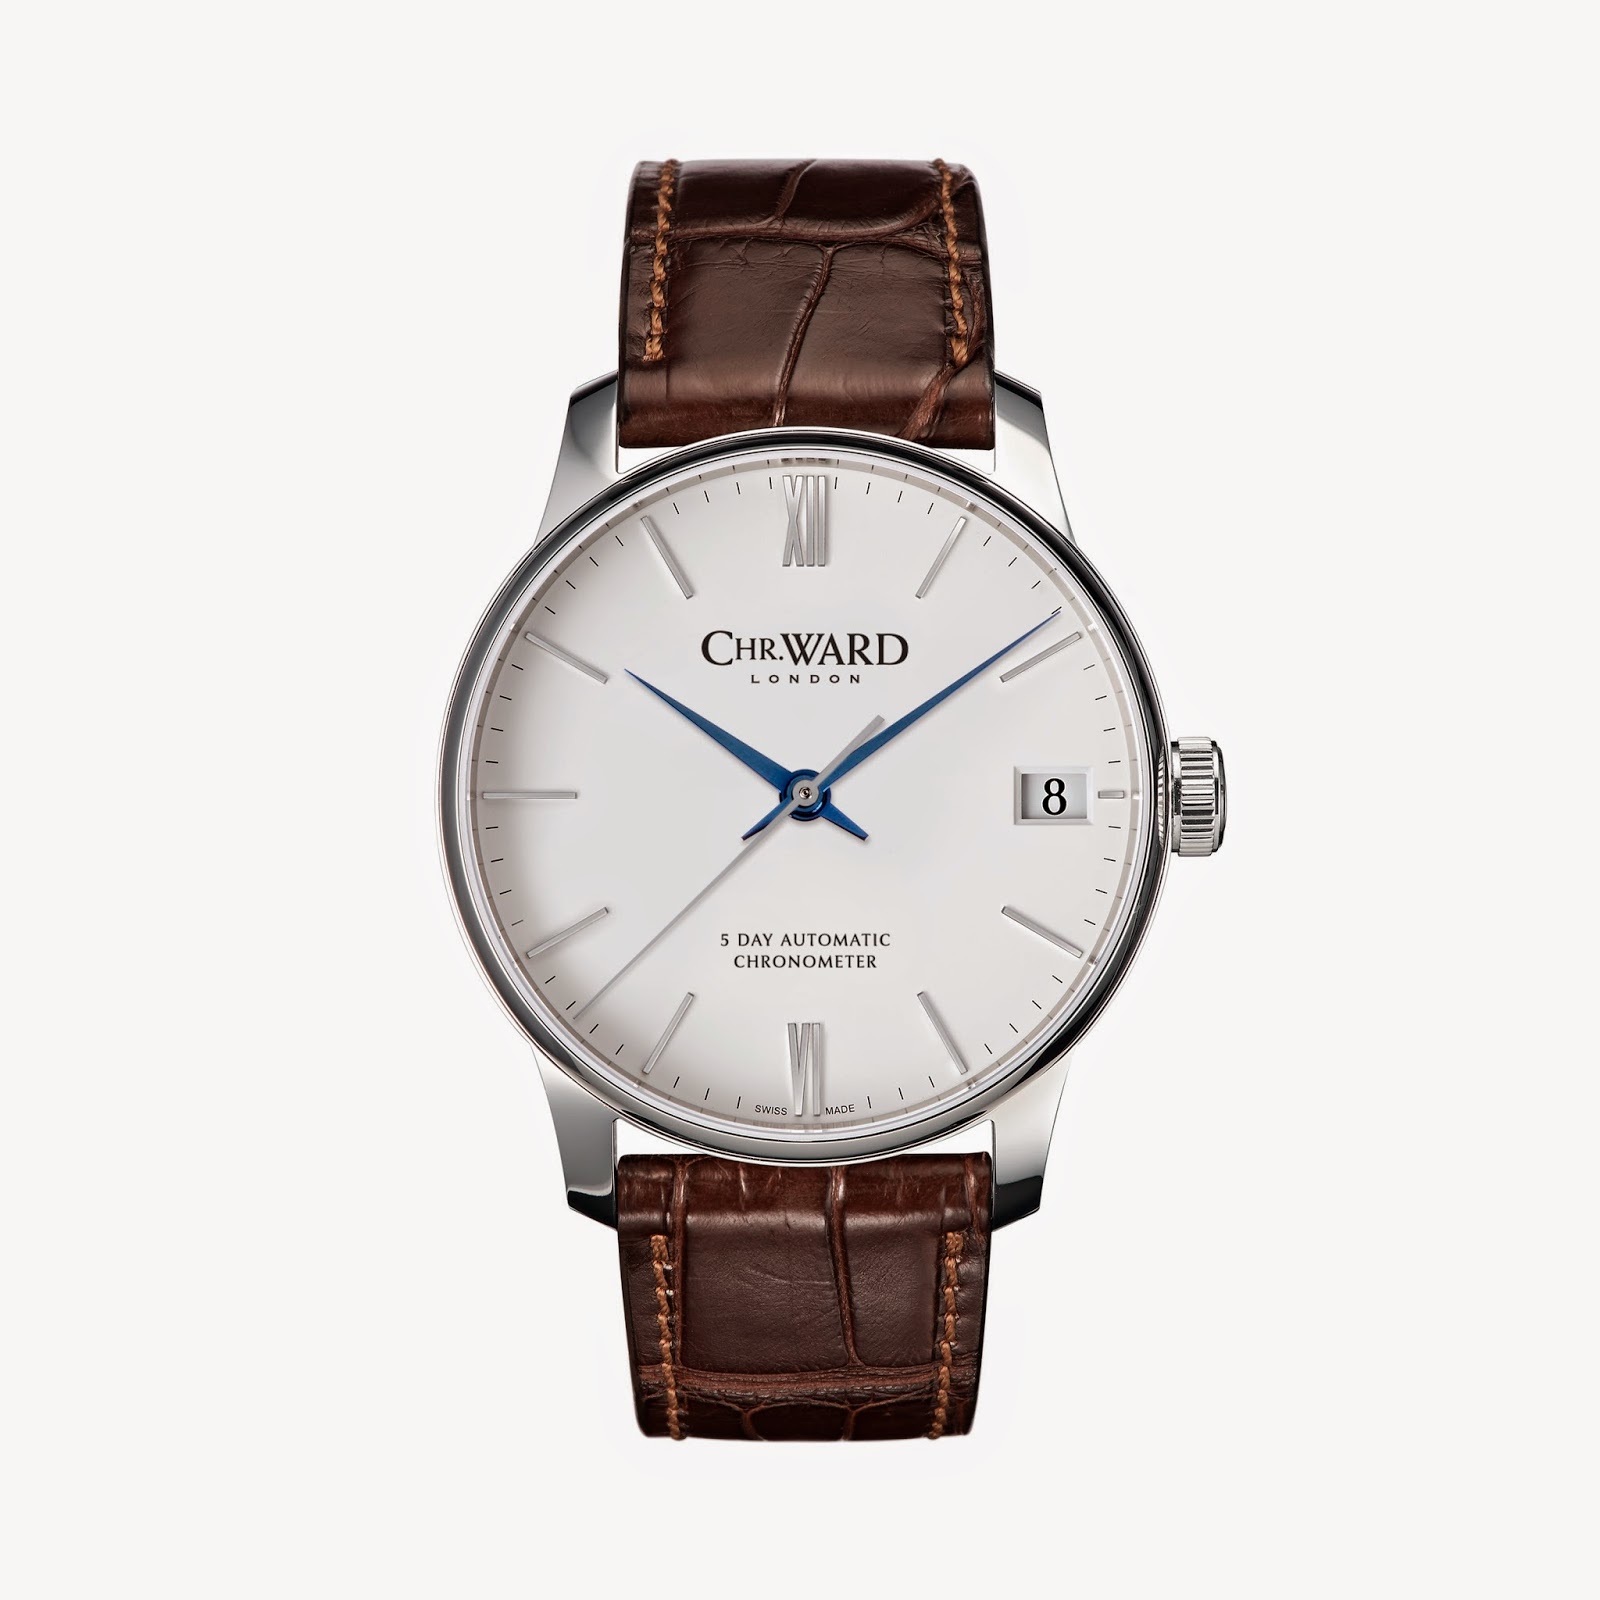 Preview: Christopher Ward C9 5 Day Automatic (40mm)